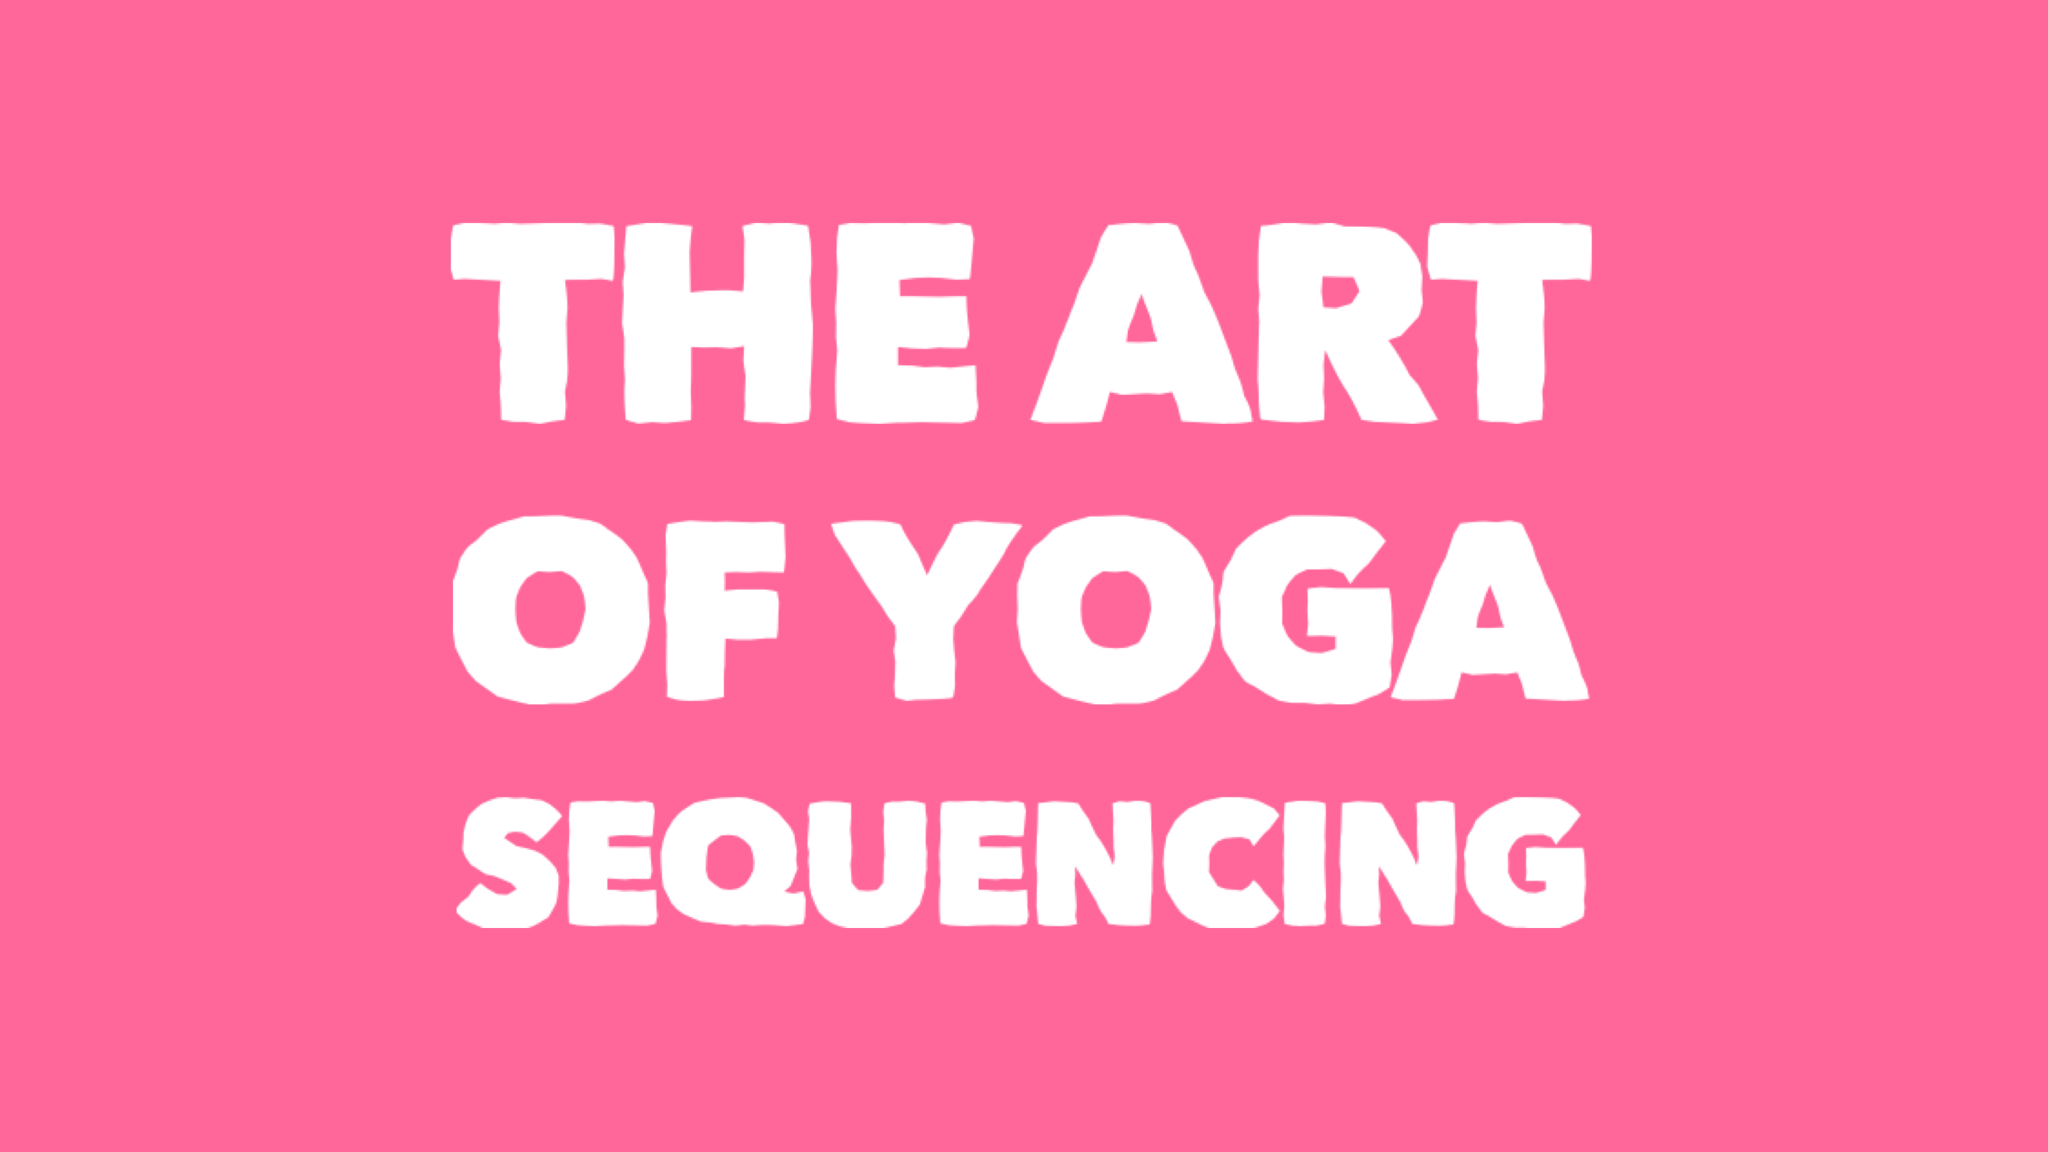 The Art of Yoga Sequencing